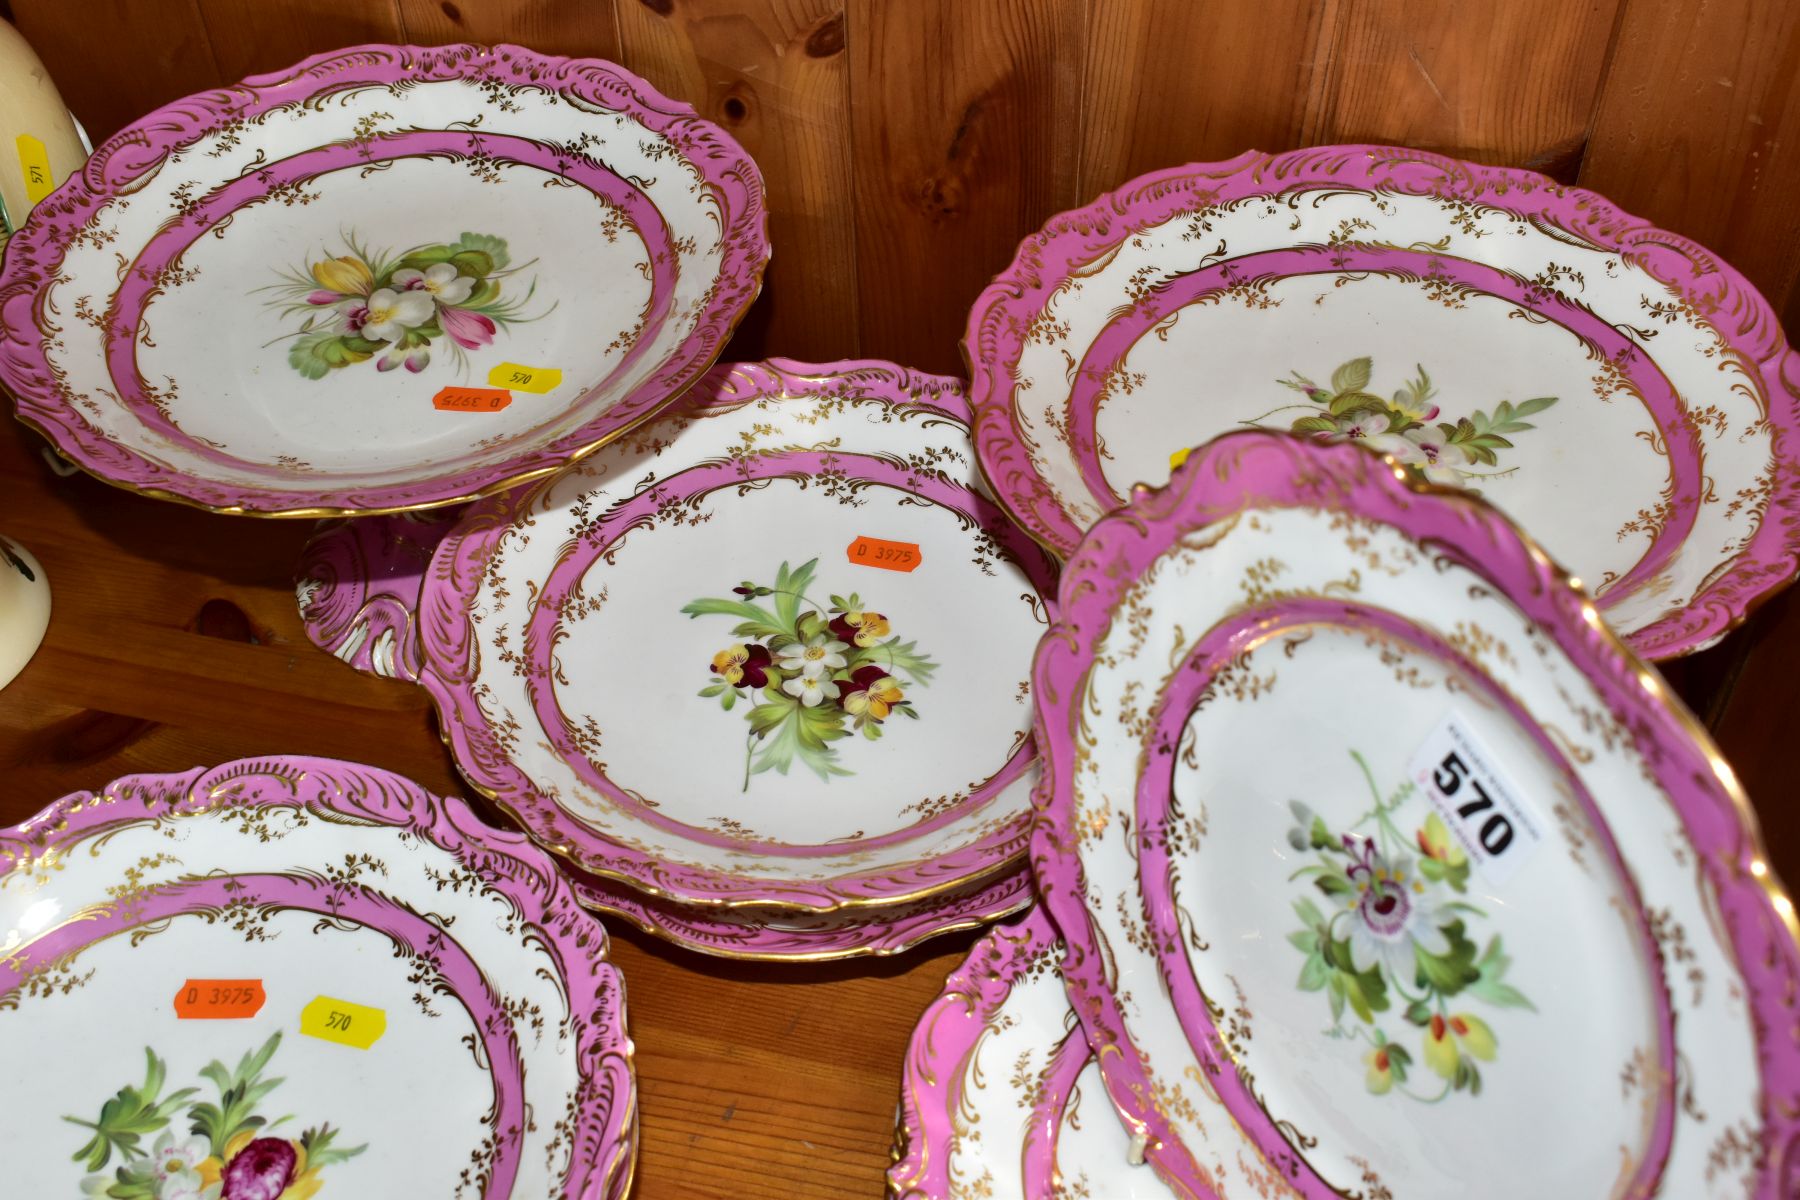 A SIXTEEN PIECE LATE VICTORIAN/EDWARDIAN DESSERT SET, POSSIBLY COALPORT, with gilt and modelled - Image 6 of 10